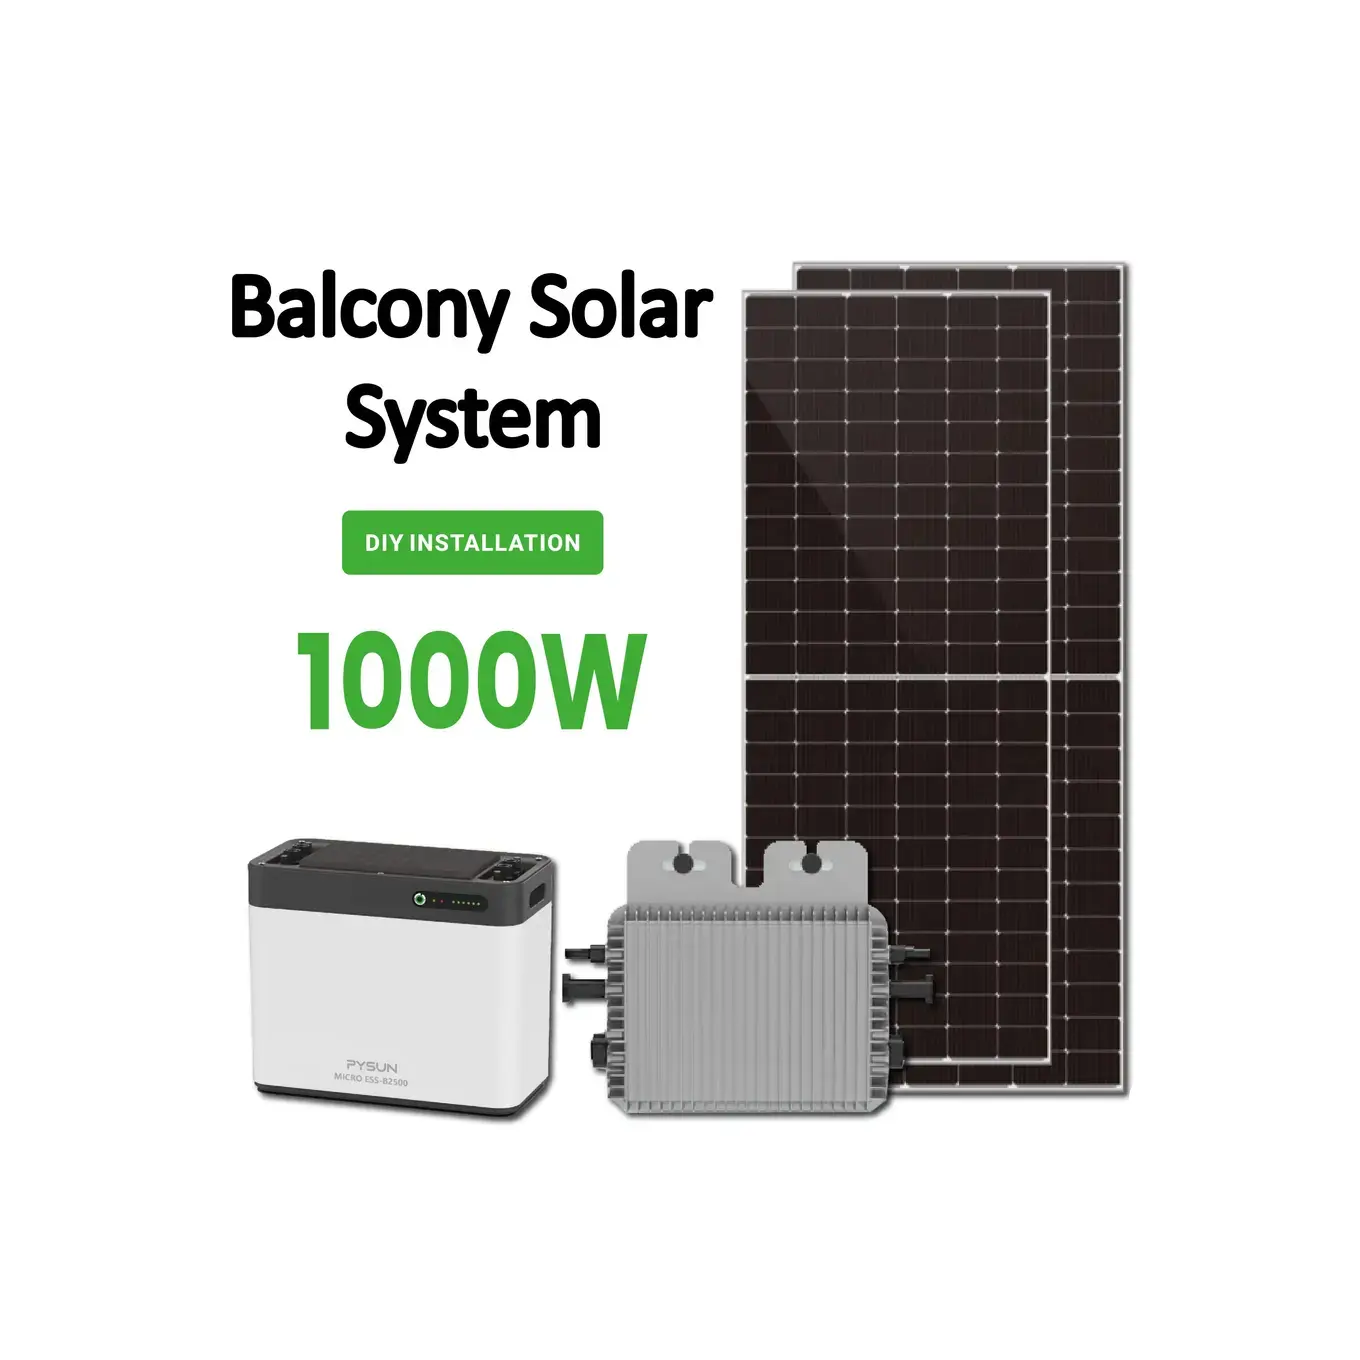 PYSUN 800w Plug and Play Balcony Solar Storage System with Solar Microinverter and Storage Battery in Germany Apartment